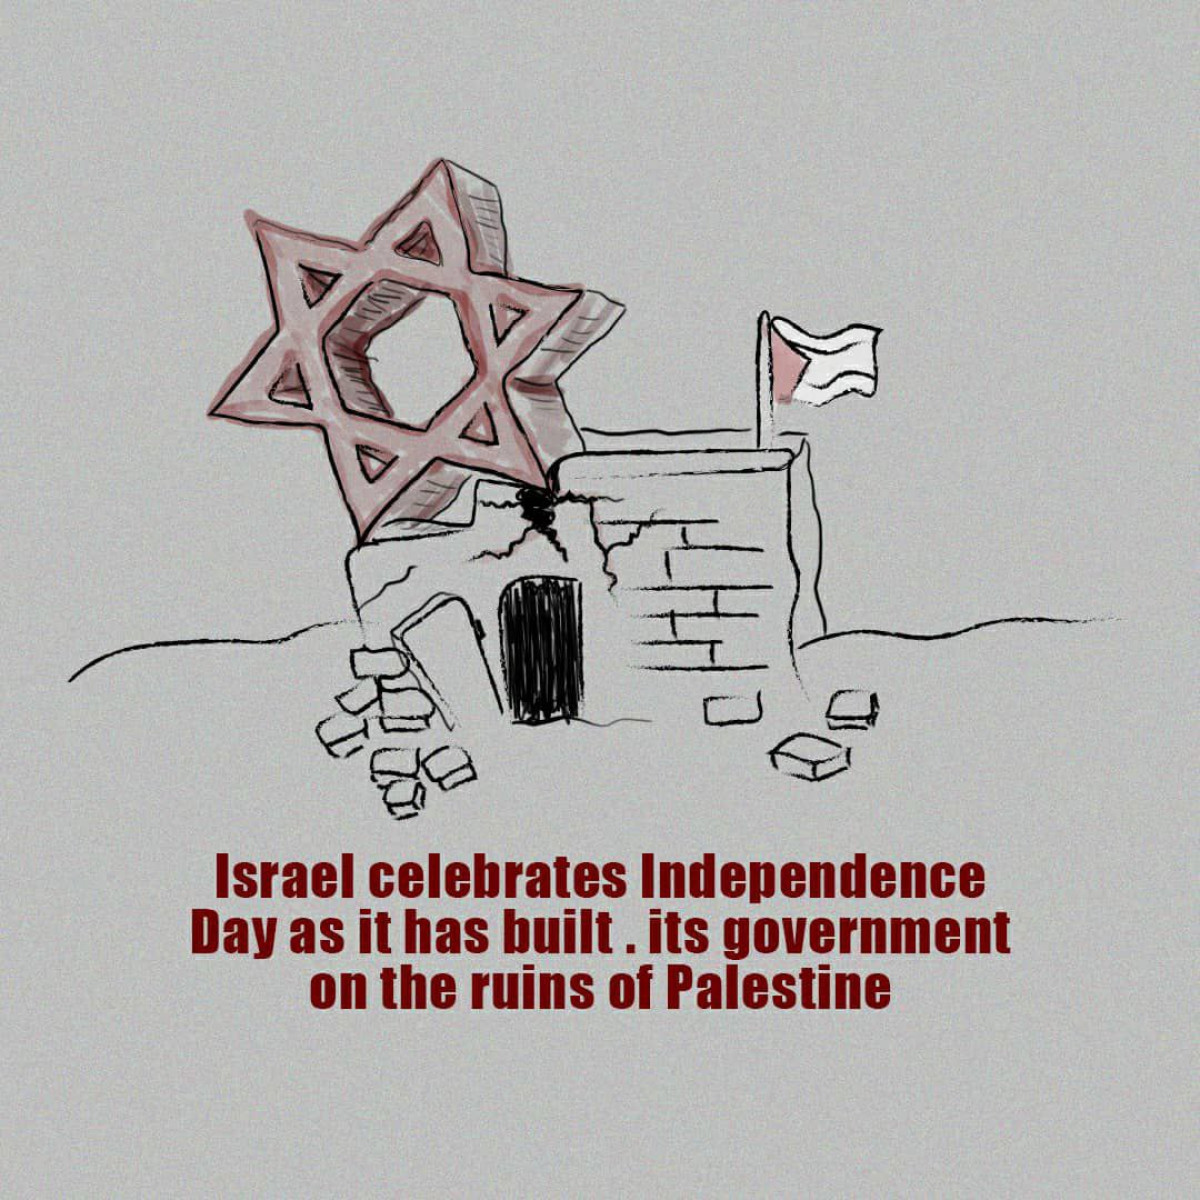 Israel celebrates independence day as it has built it's government on the ruins of Palestine.